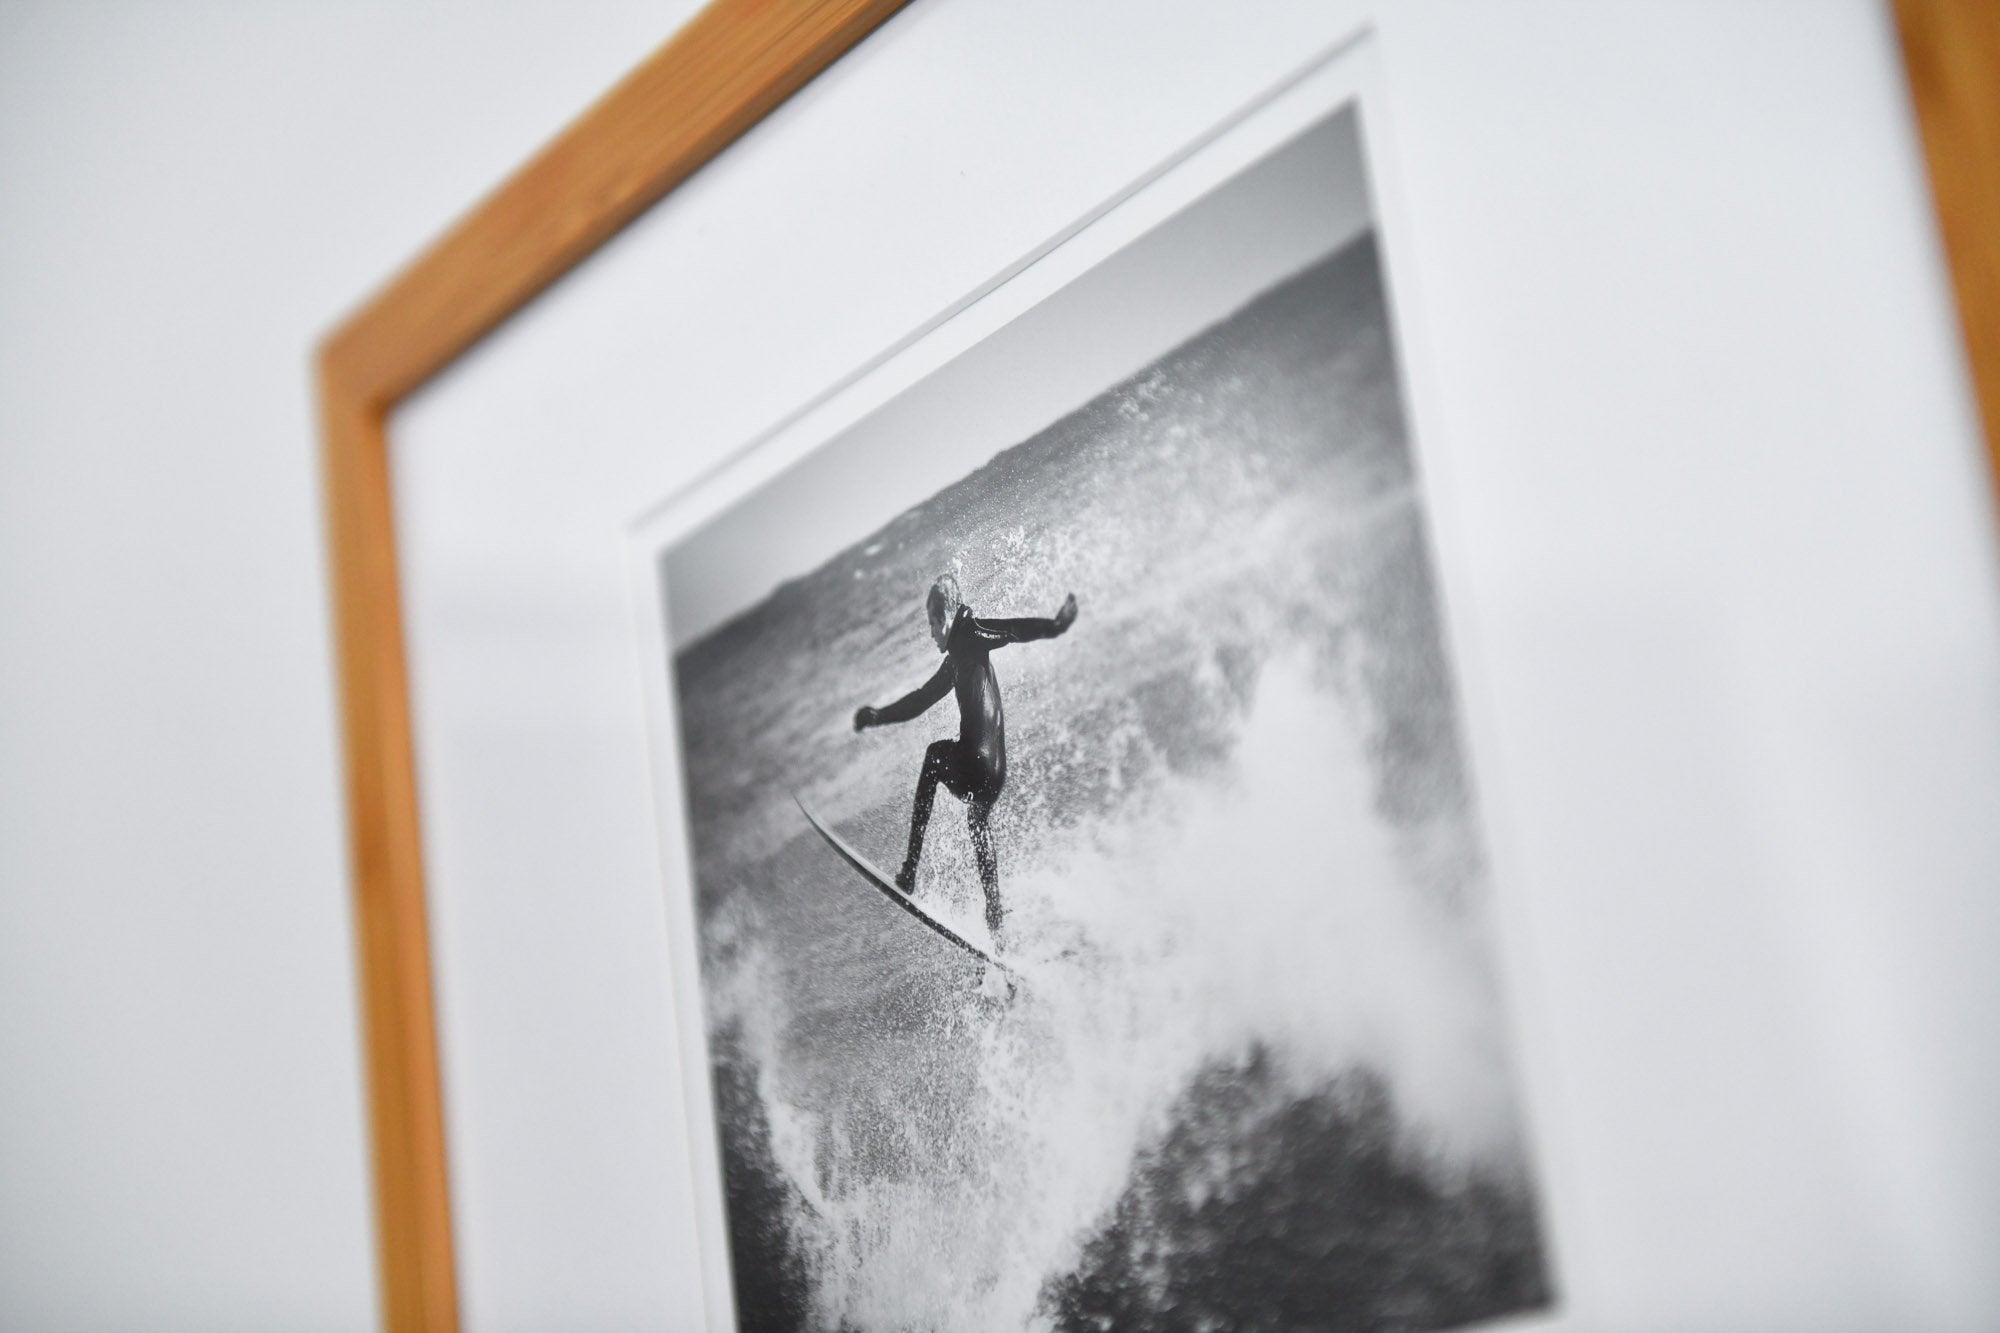 Cate Brown Photo Surfer #2 // Framed Fine Art 11x14" // Limited Edition 1 of 20 Available Inventory Ocean Fine Art